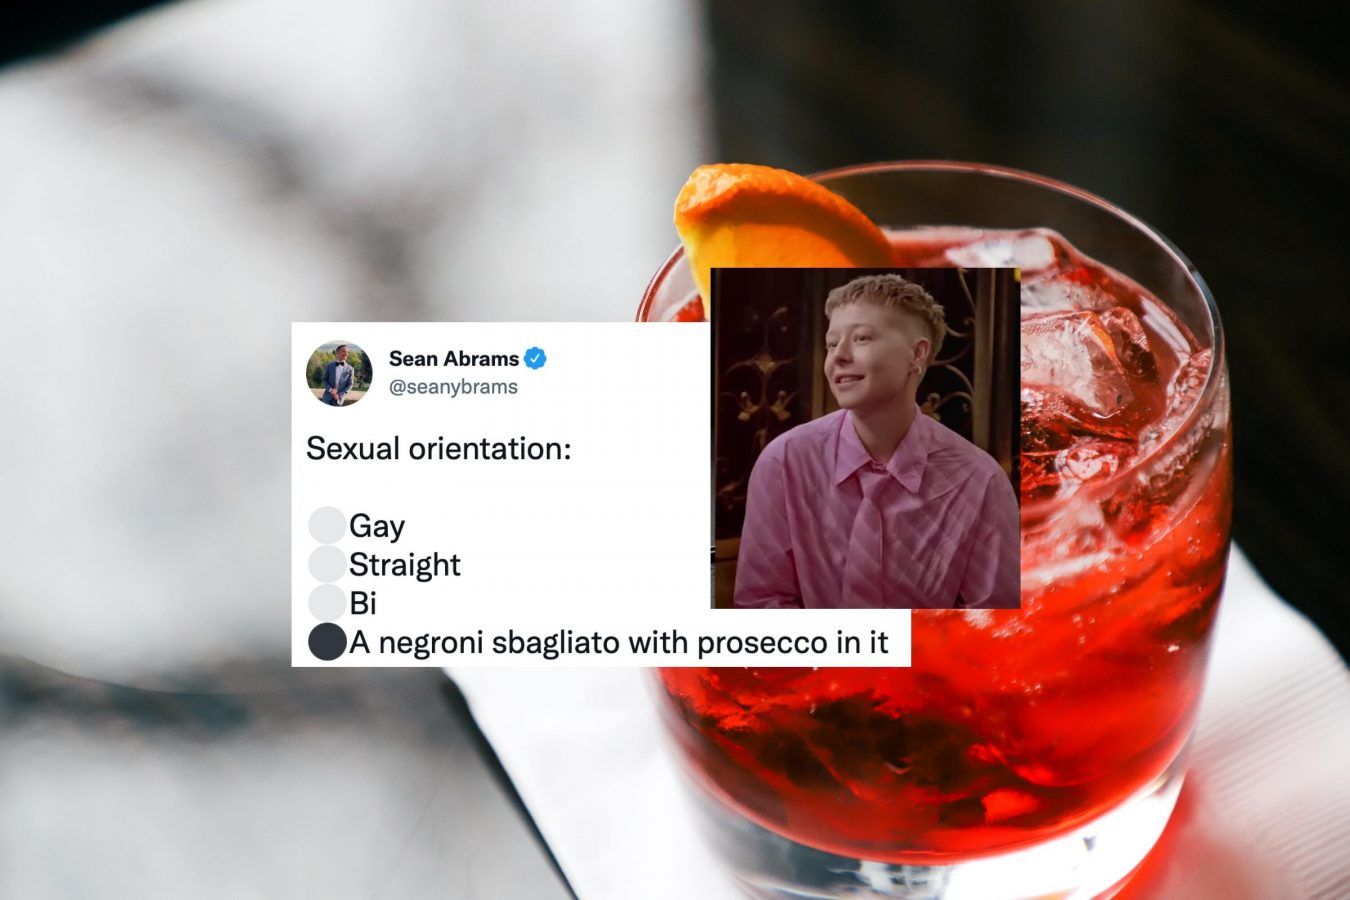 The “Negroni Sbagliato with Prosecco in it” has set the Internet aflame